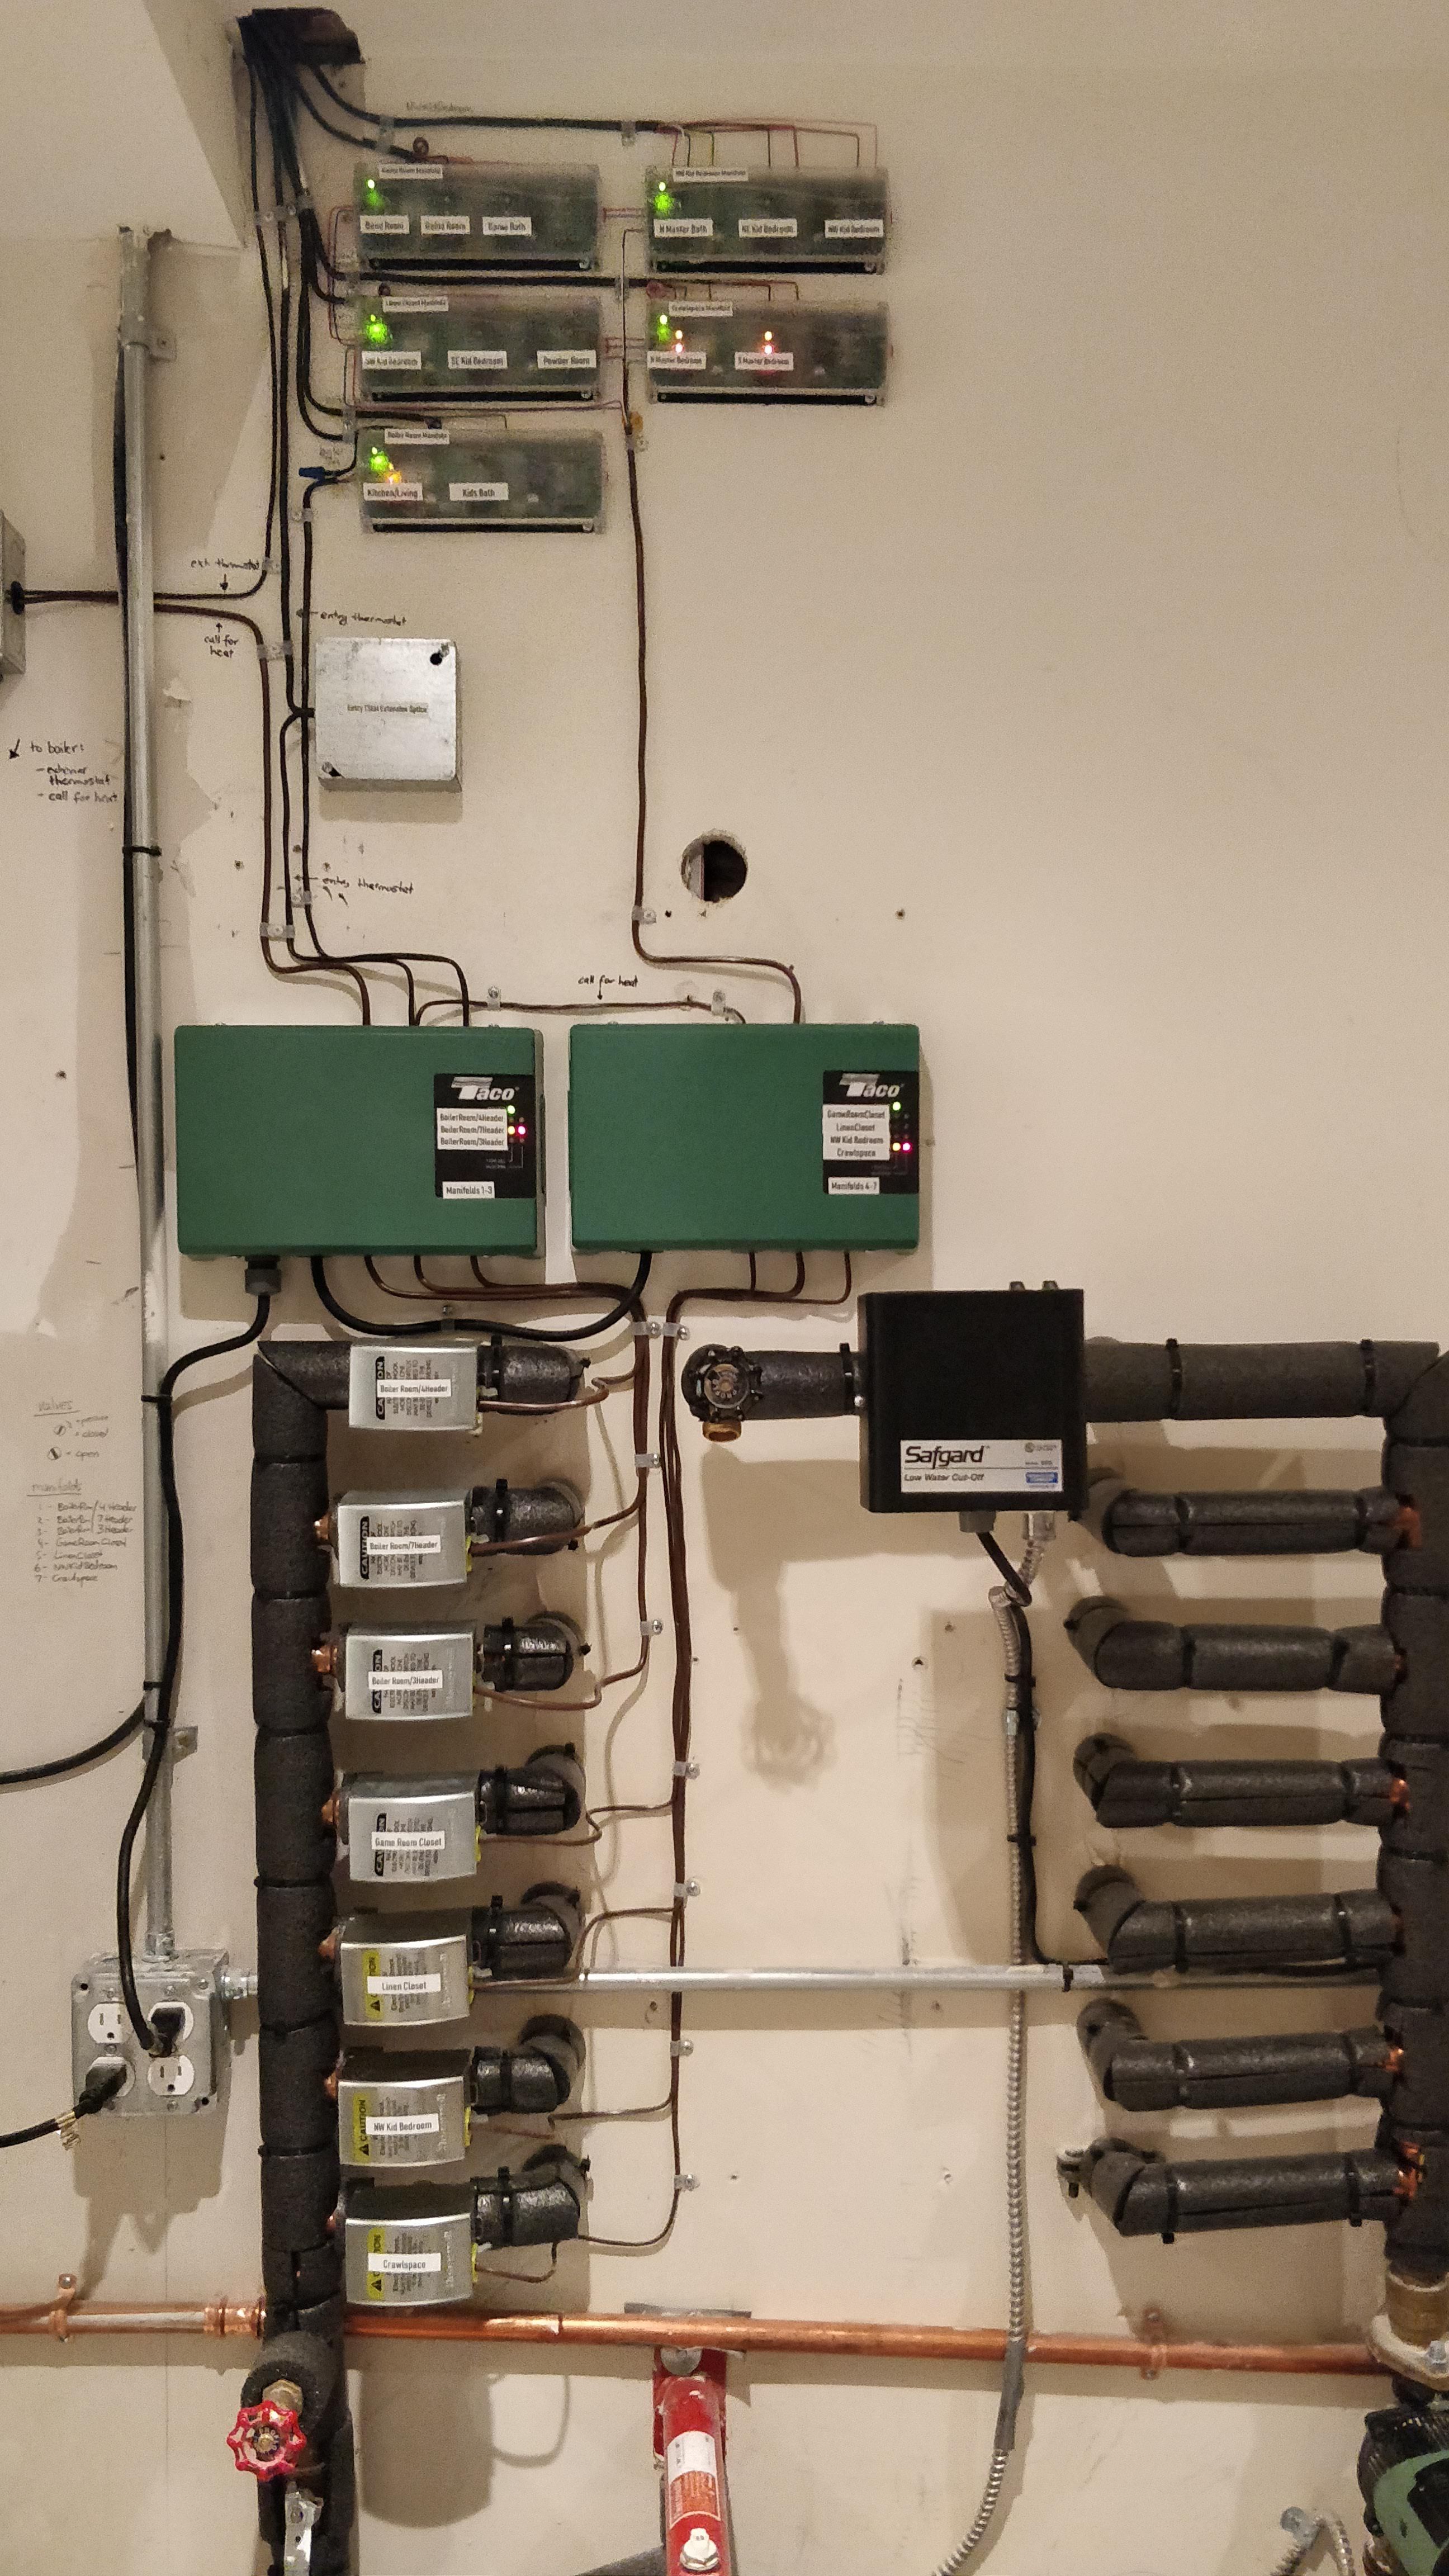 Central control wiring, with covers and labels